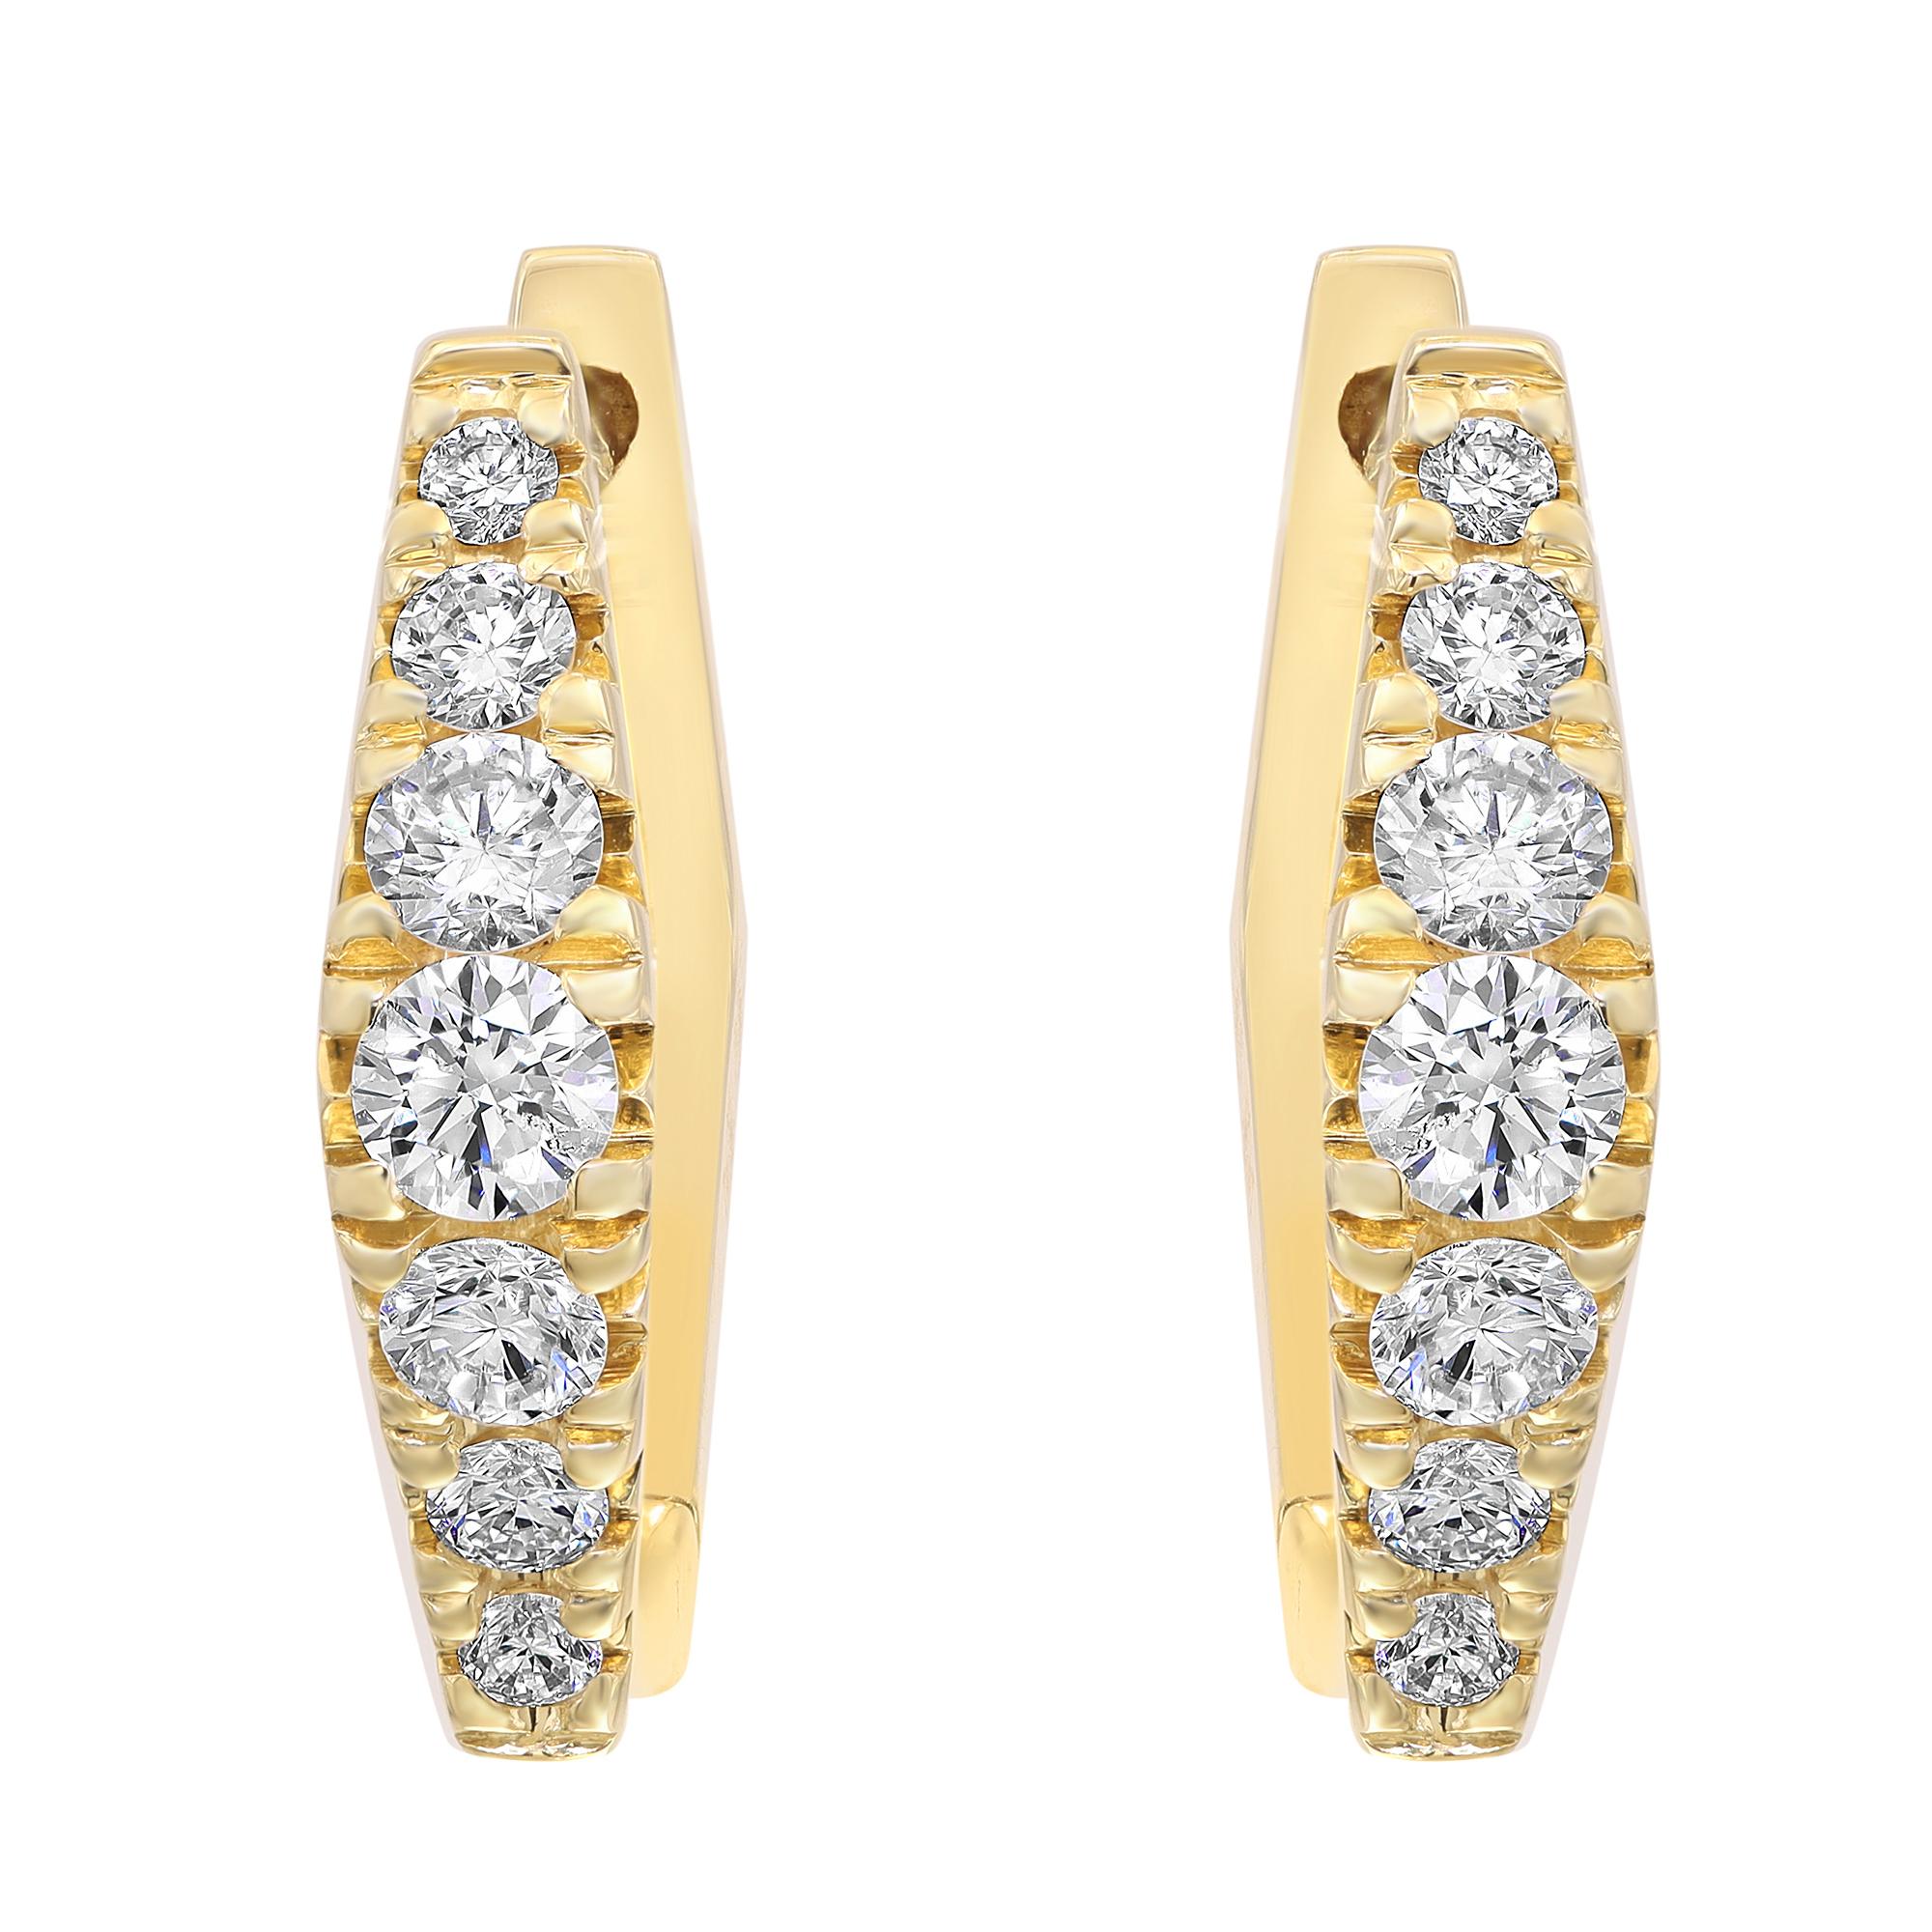 Sleek and modern hexagon shaped diamond huggie earrings, perfect for a great everyday look. These earrings are crafted in fine high polished 14K yellow gold and encrusted with bright white round cut diamonds in graduation weighing 0.49 carat.